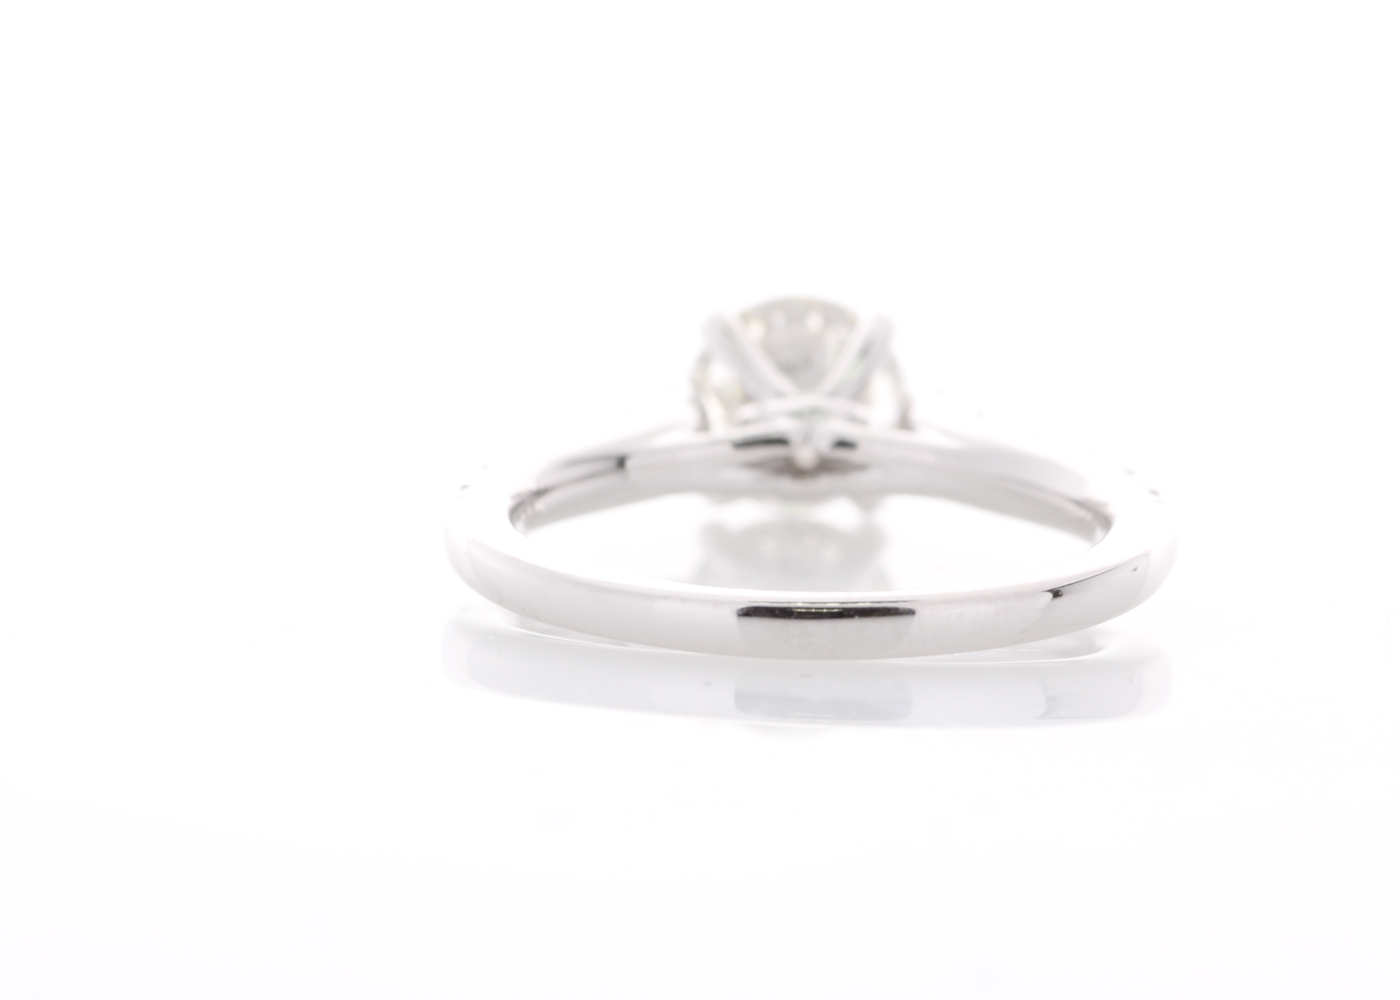 18ct White Gold Stone Set Shoulders Diamond Ring 1.47 Carats - Image 3 of 5